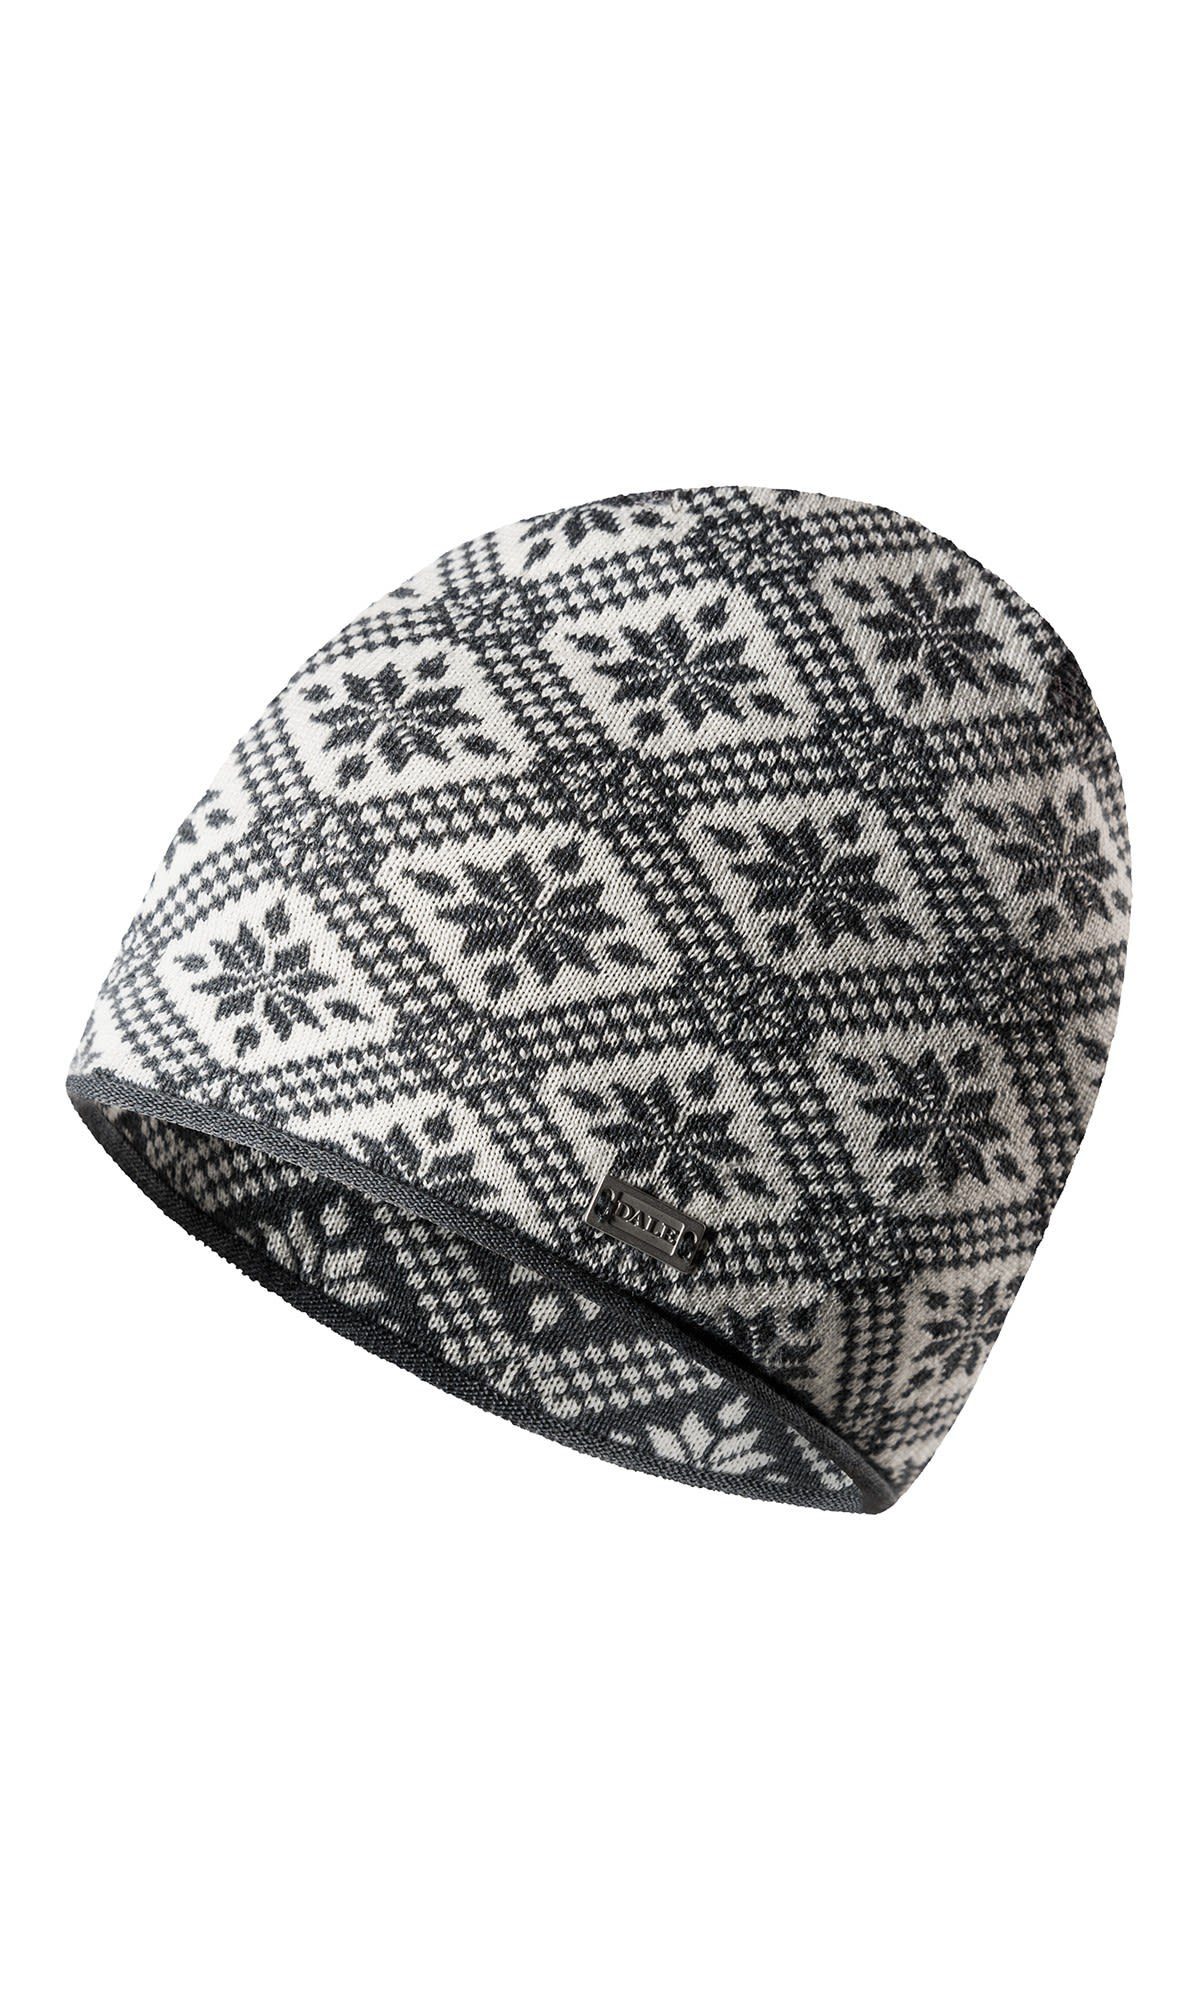 - Norway Damen Accessoires Of of Schiefer Norway Hat Dale W Offwhite Dale Christiania Beanie